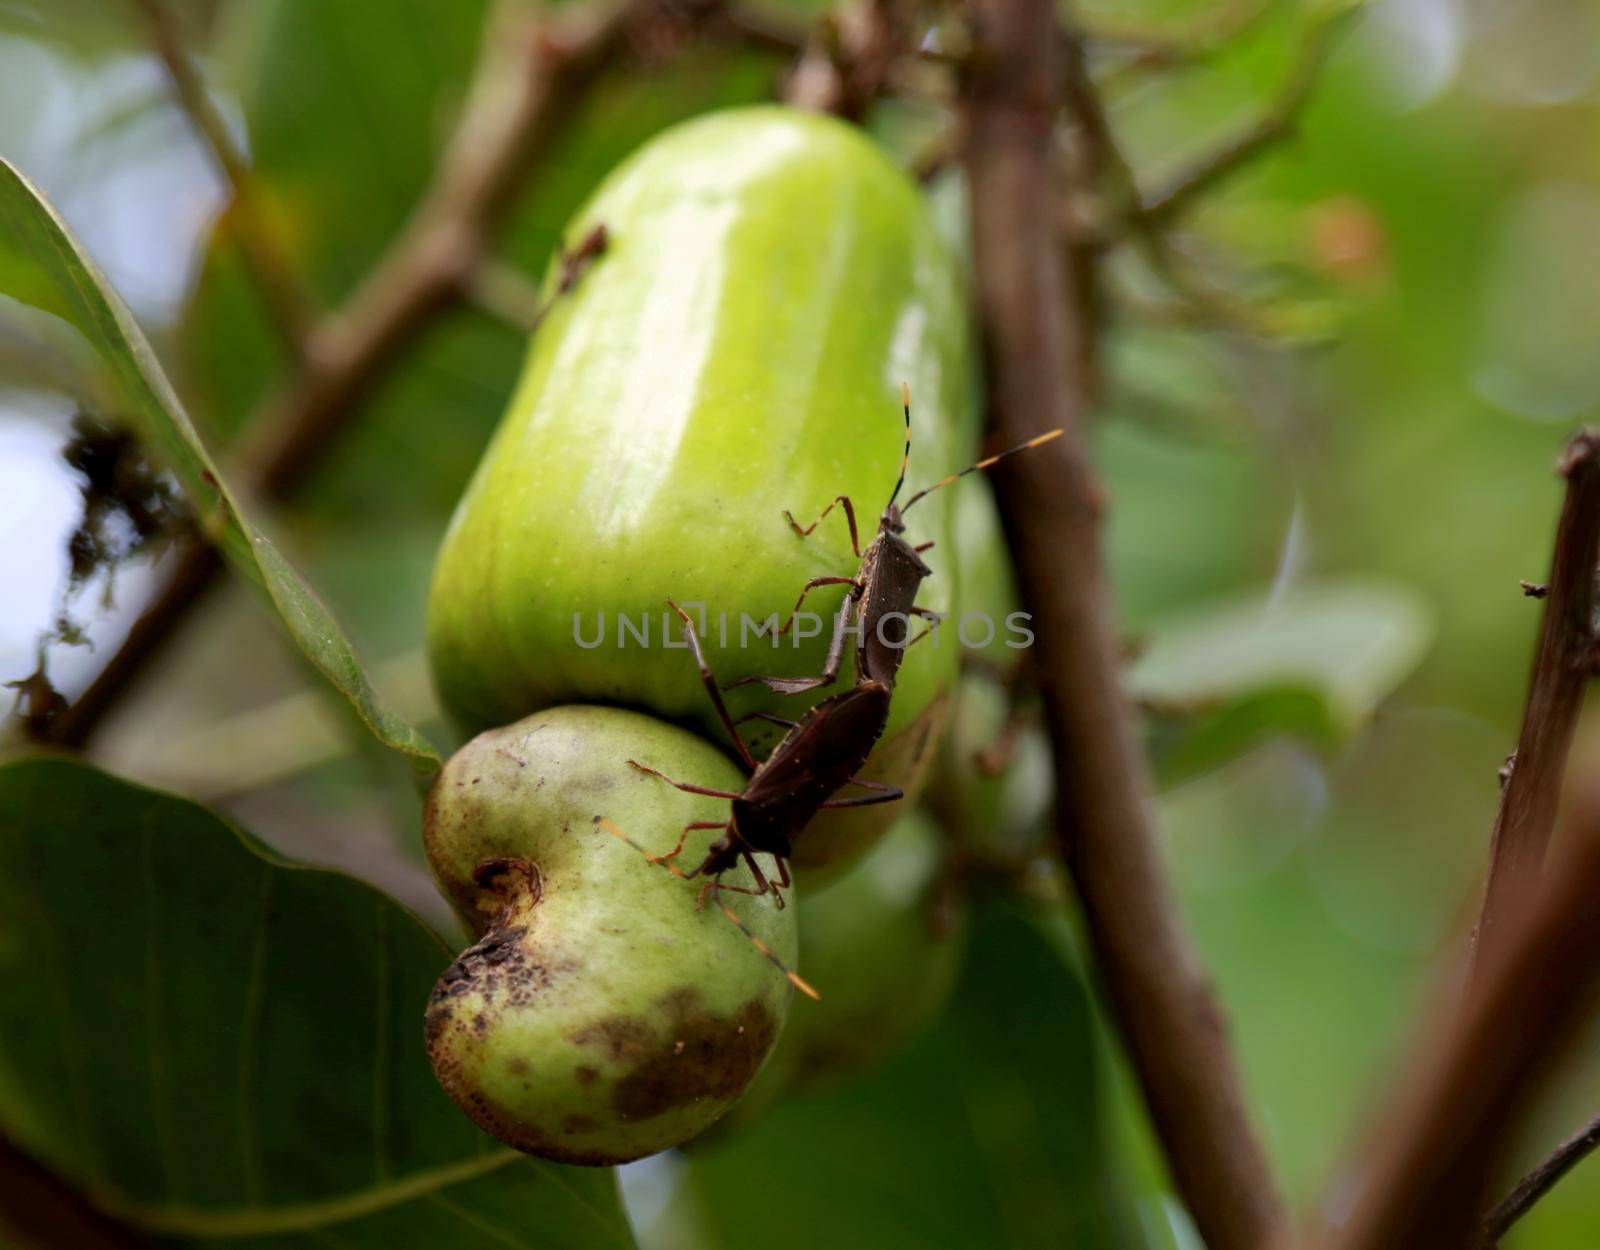 salvador, bahia / Brazil - february 26, 2015: Bed bug couple seen having sex in a cashew plantation in the city of Salvador.


